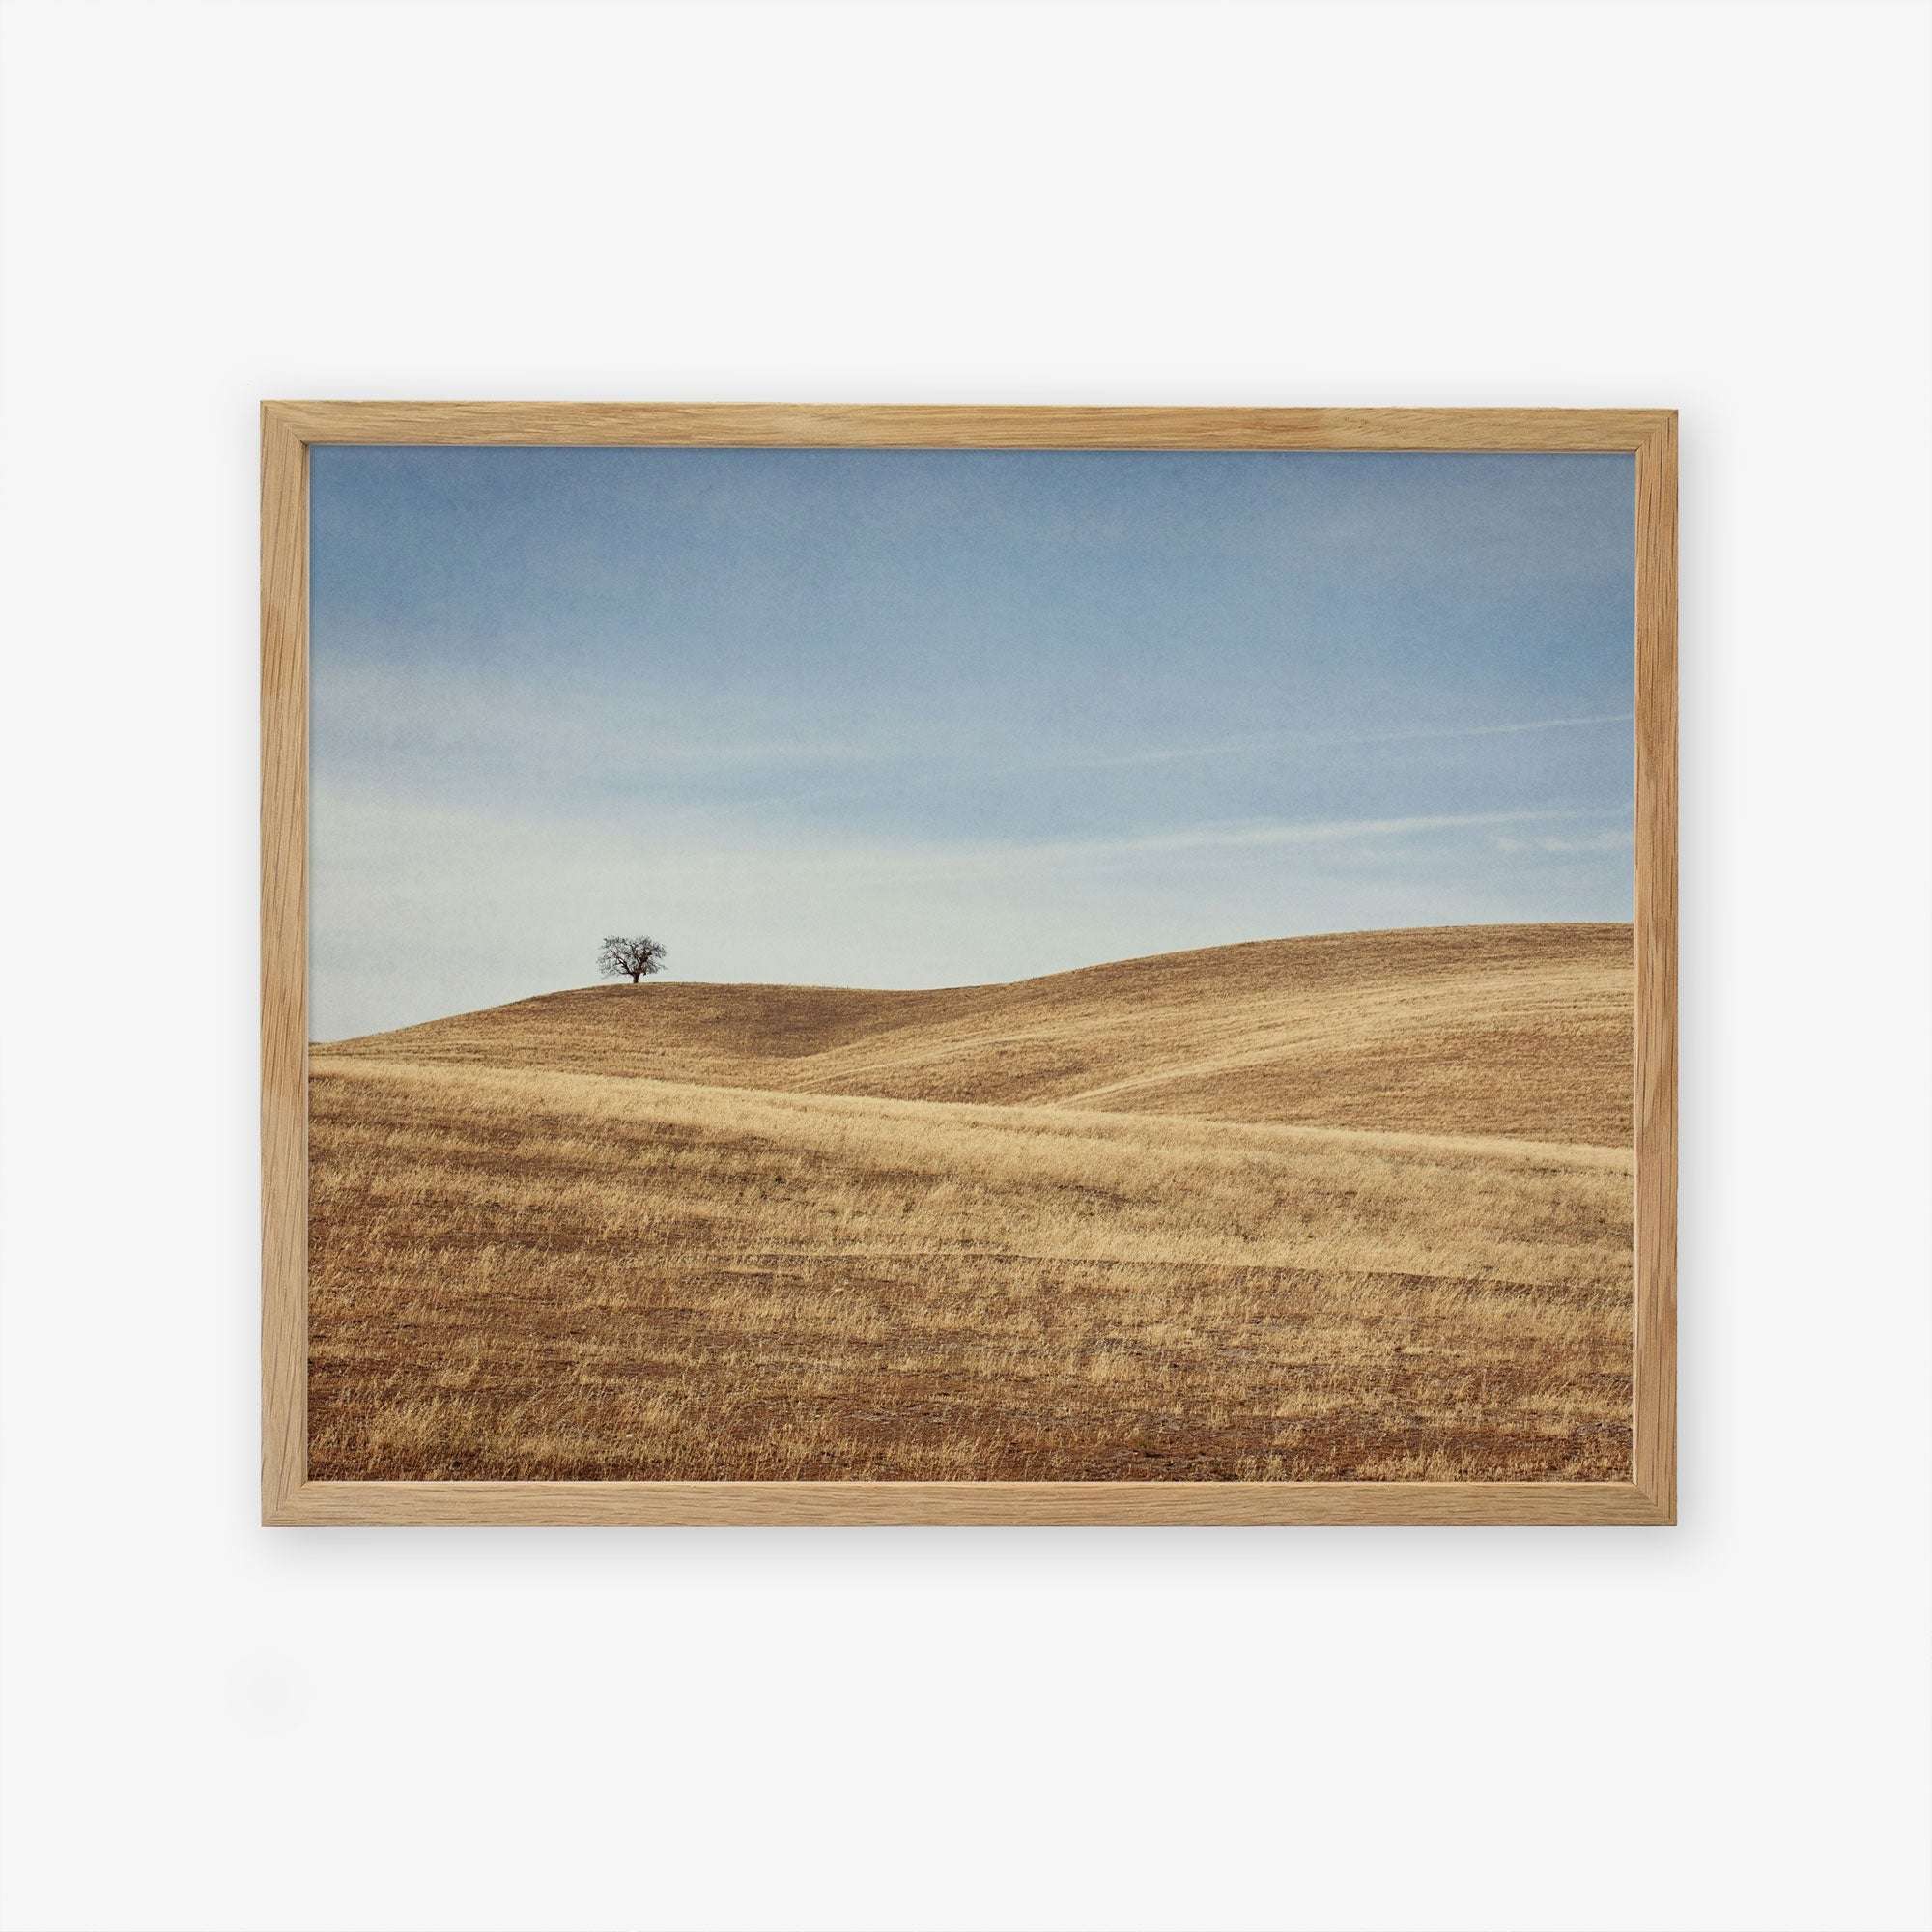 A framed artwork featuring the California Central Coast Landscape Print &#39;Golden Ynez&#39; by Offley Green, with a lone tree on a gently rolling, golden-hued hill under a clear blue sky. The scene invokes a sense of calm and tranquility.